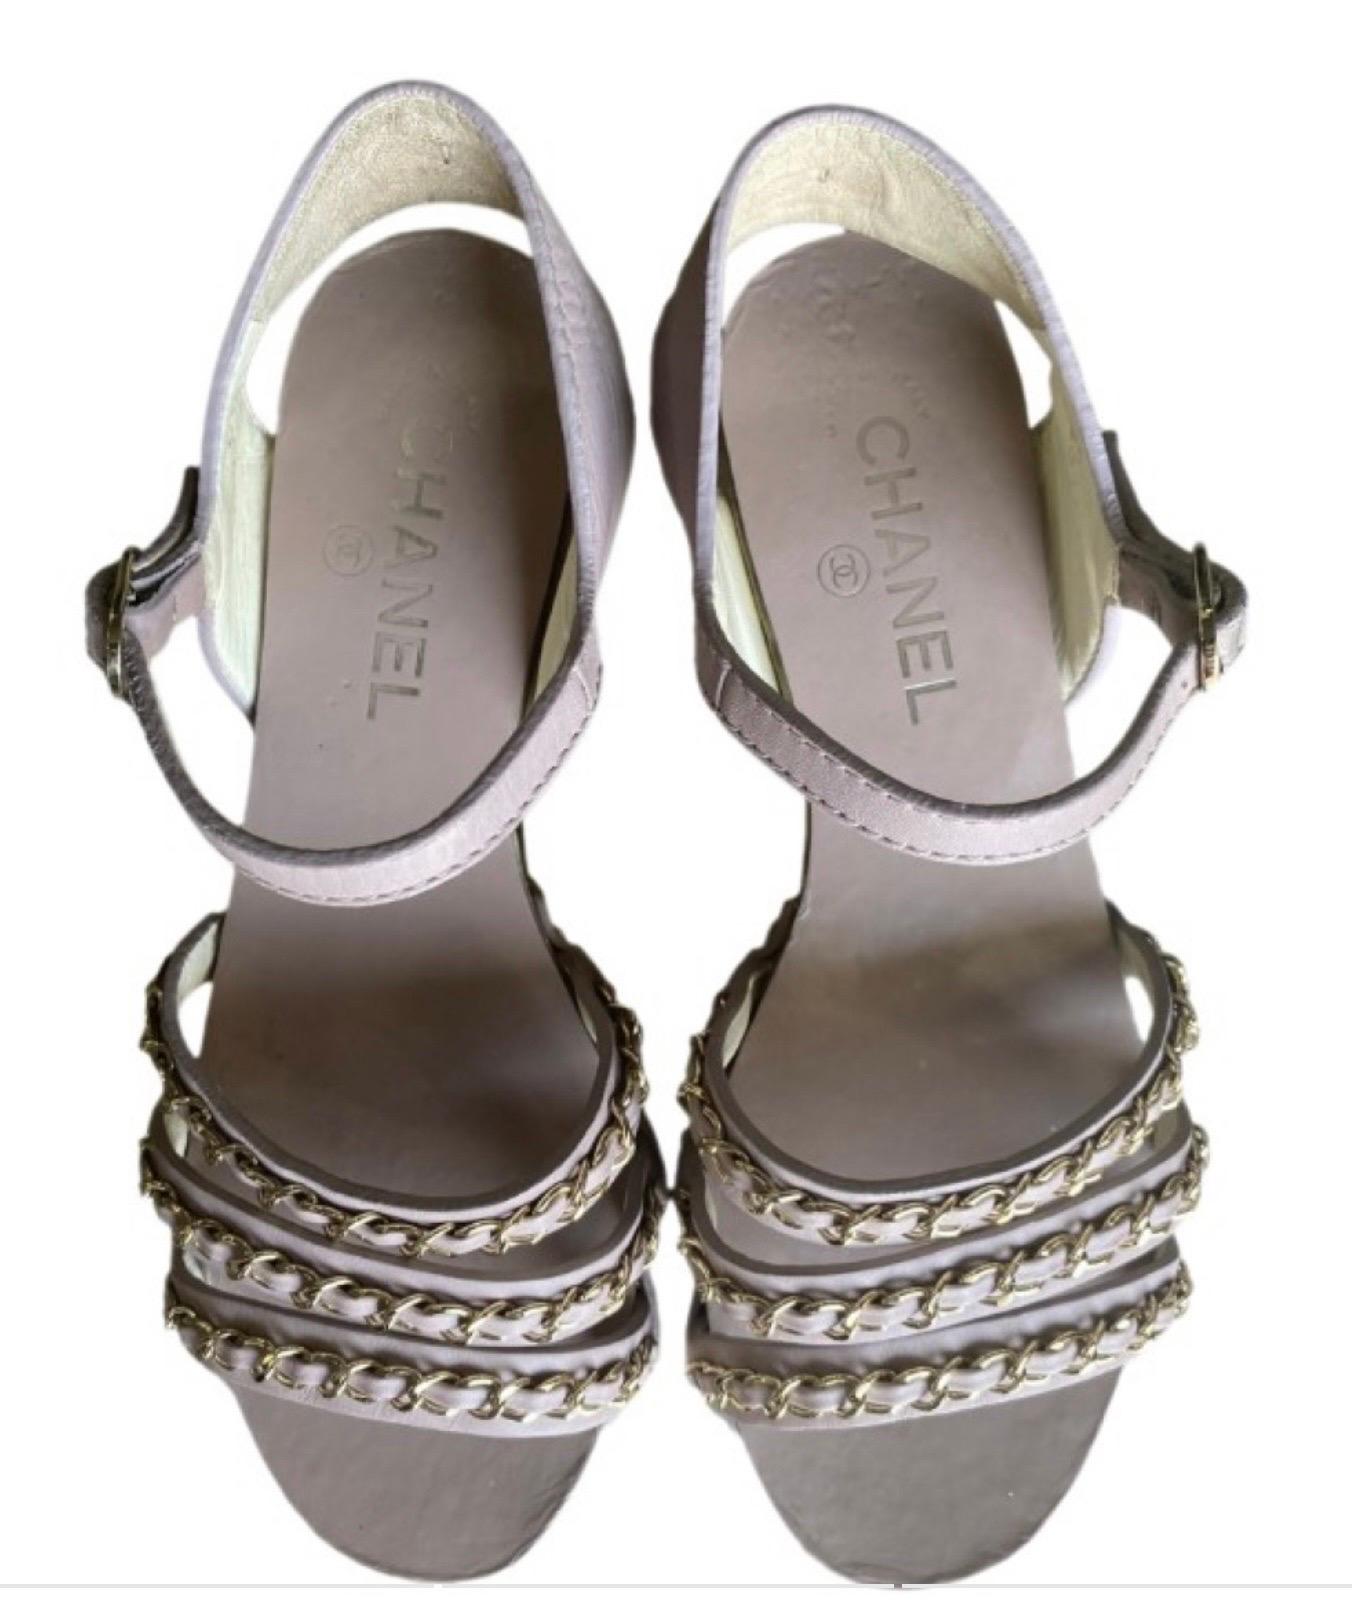 Chanel clogs in pink leather, number 38, with studs and gold-colored metal chains, interesting material of the sole, it is in pearl-effect resin and golden spatulas, the heel measures cm7, while the wedge cm4, the insole measures cm 25 scarce, the